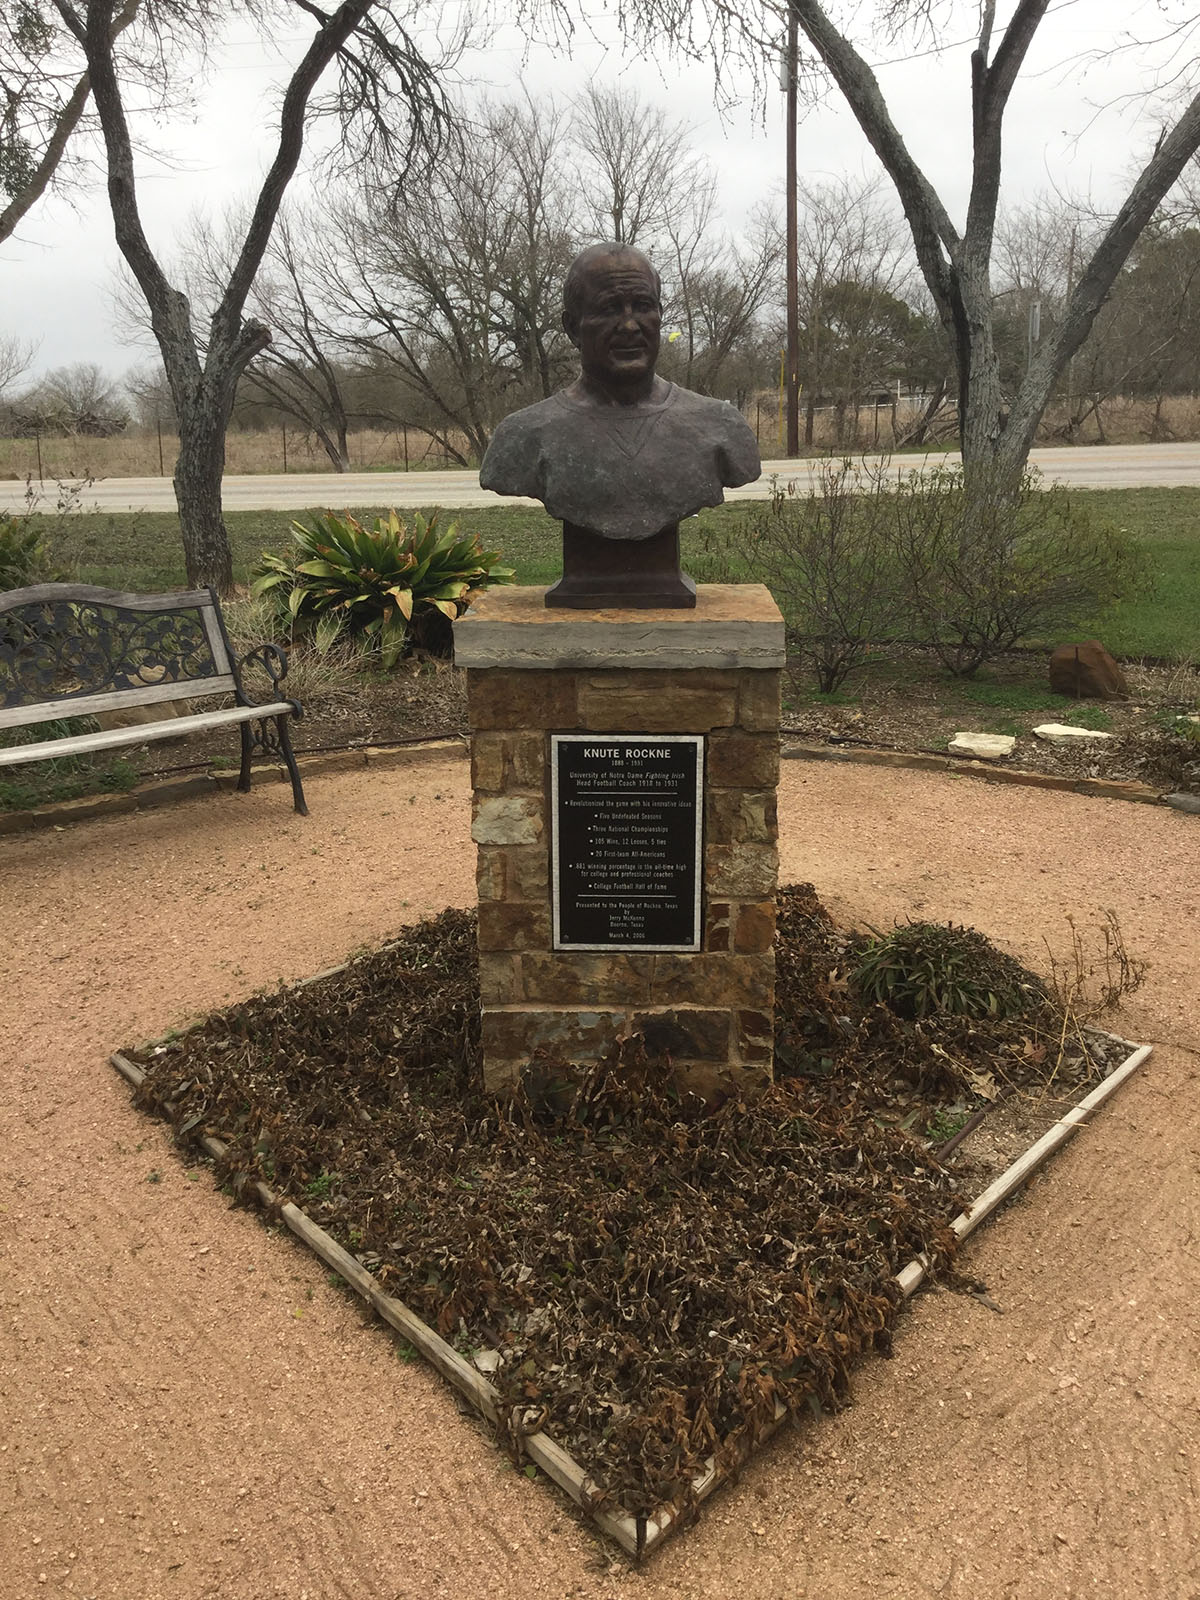 A bronze bust of Notre Dame football coach Knute Rockne sits upon a stone pedestal situated in a garden. Photo by Michael Corcoran. 